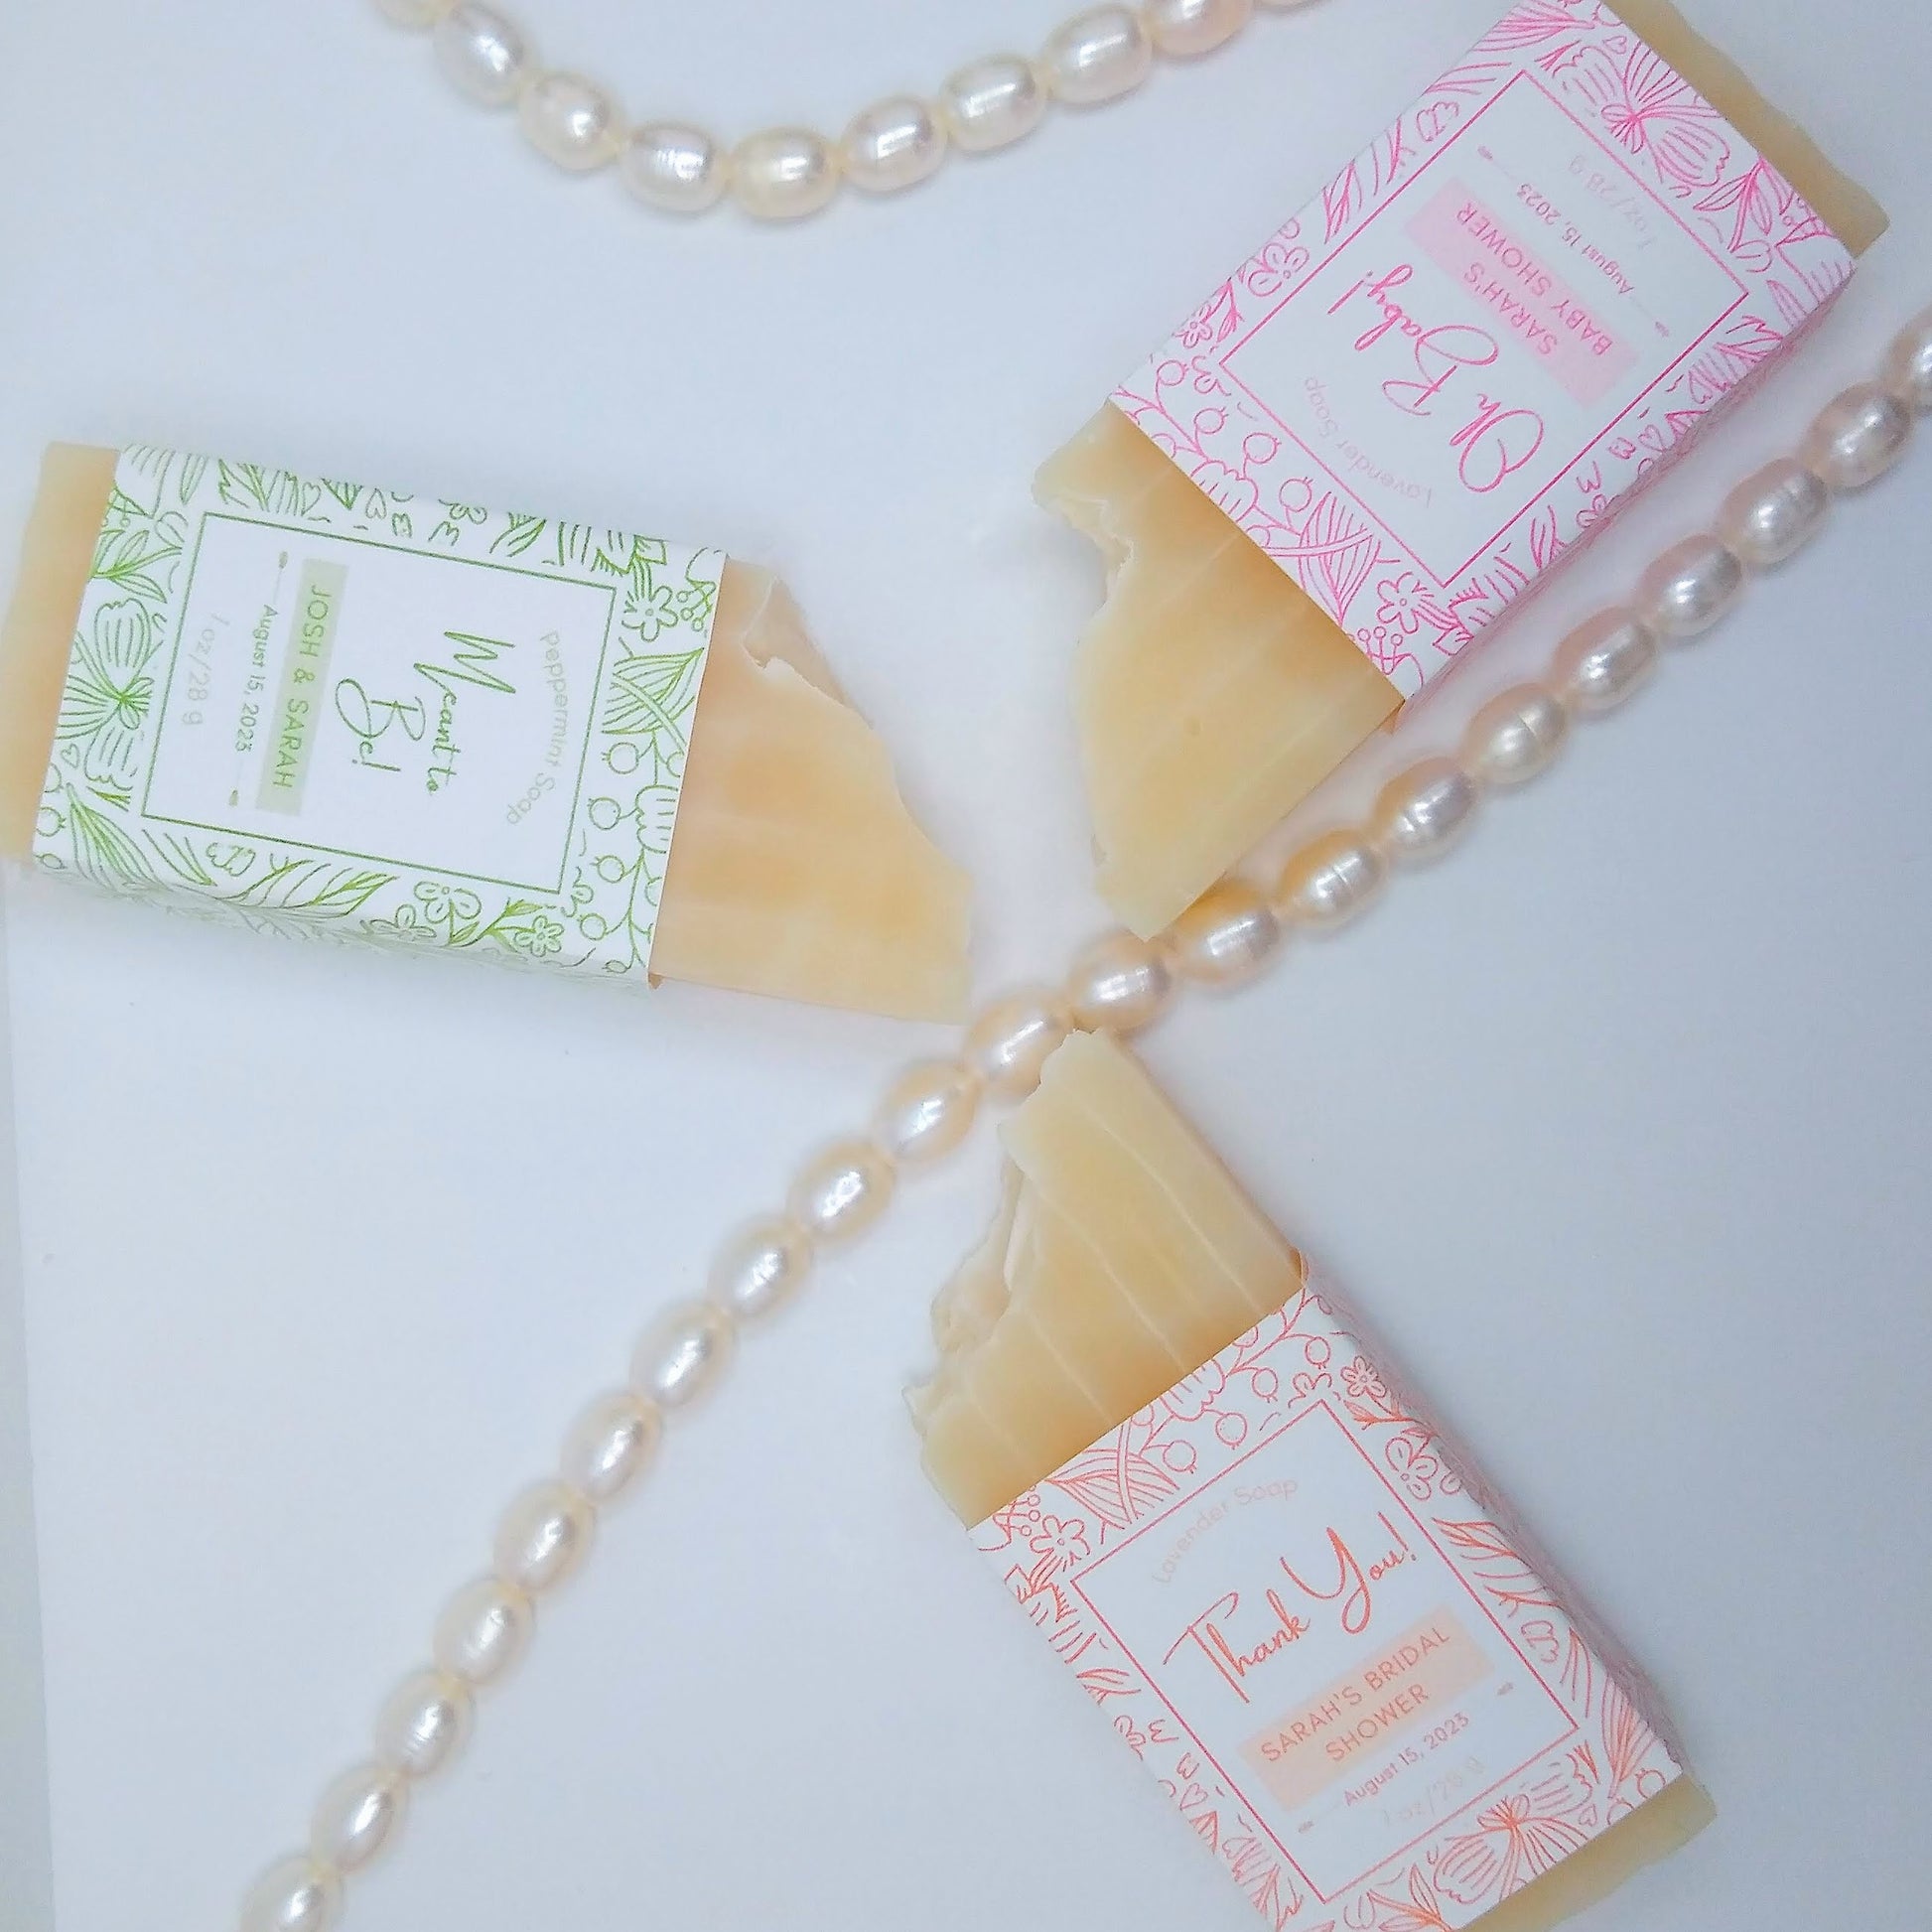 3 mini bars of cream-colored soap in a pinwheel shape around a string of pearls. One has a light green label, another an orange label, and another a pink label.